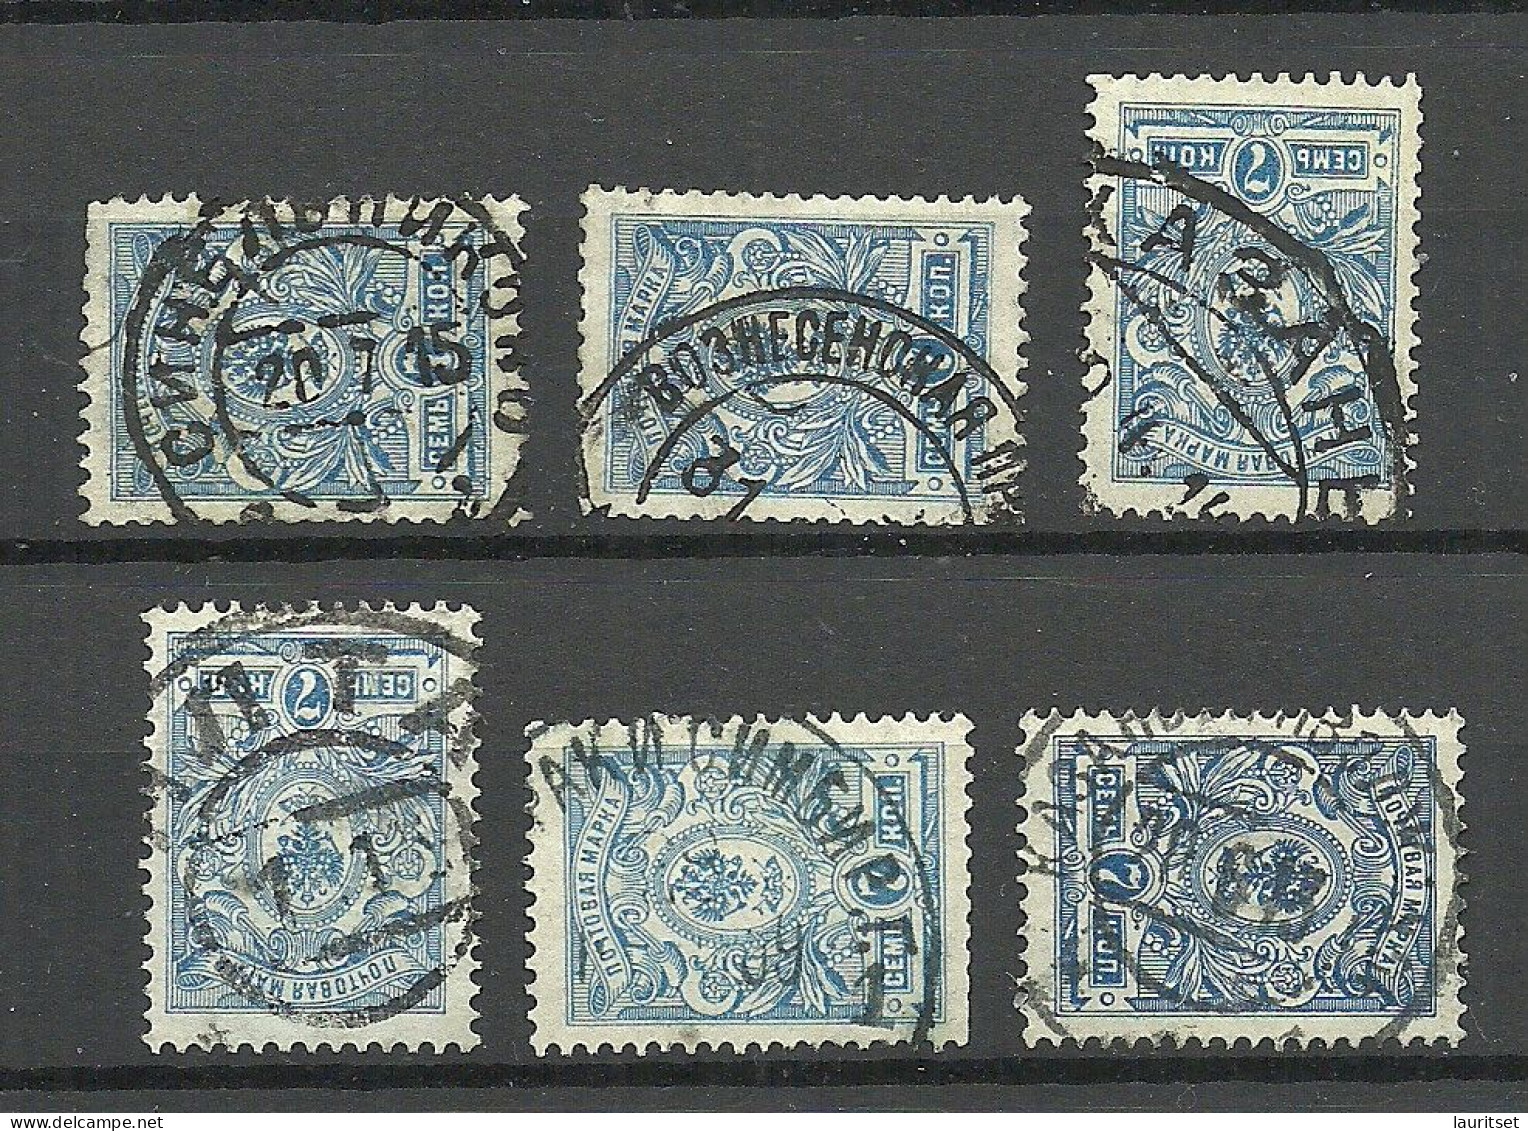 RUSSLAND RUSSIA 1908 Michel 68 I A, 6 Stamps, Nice Cancels - Used Stamps